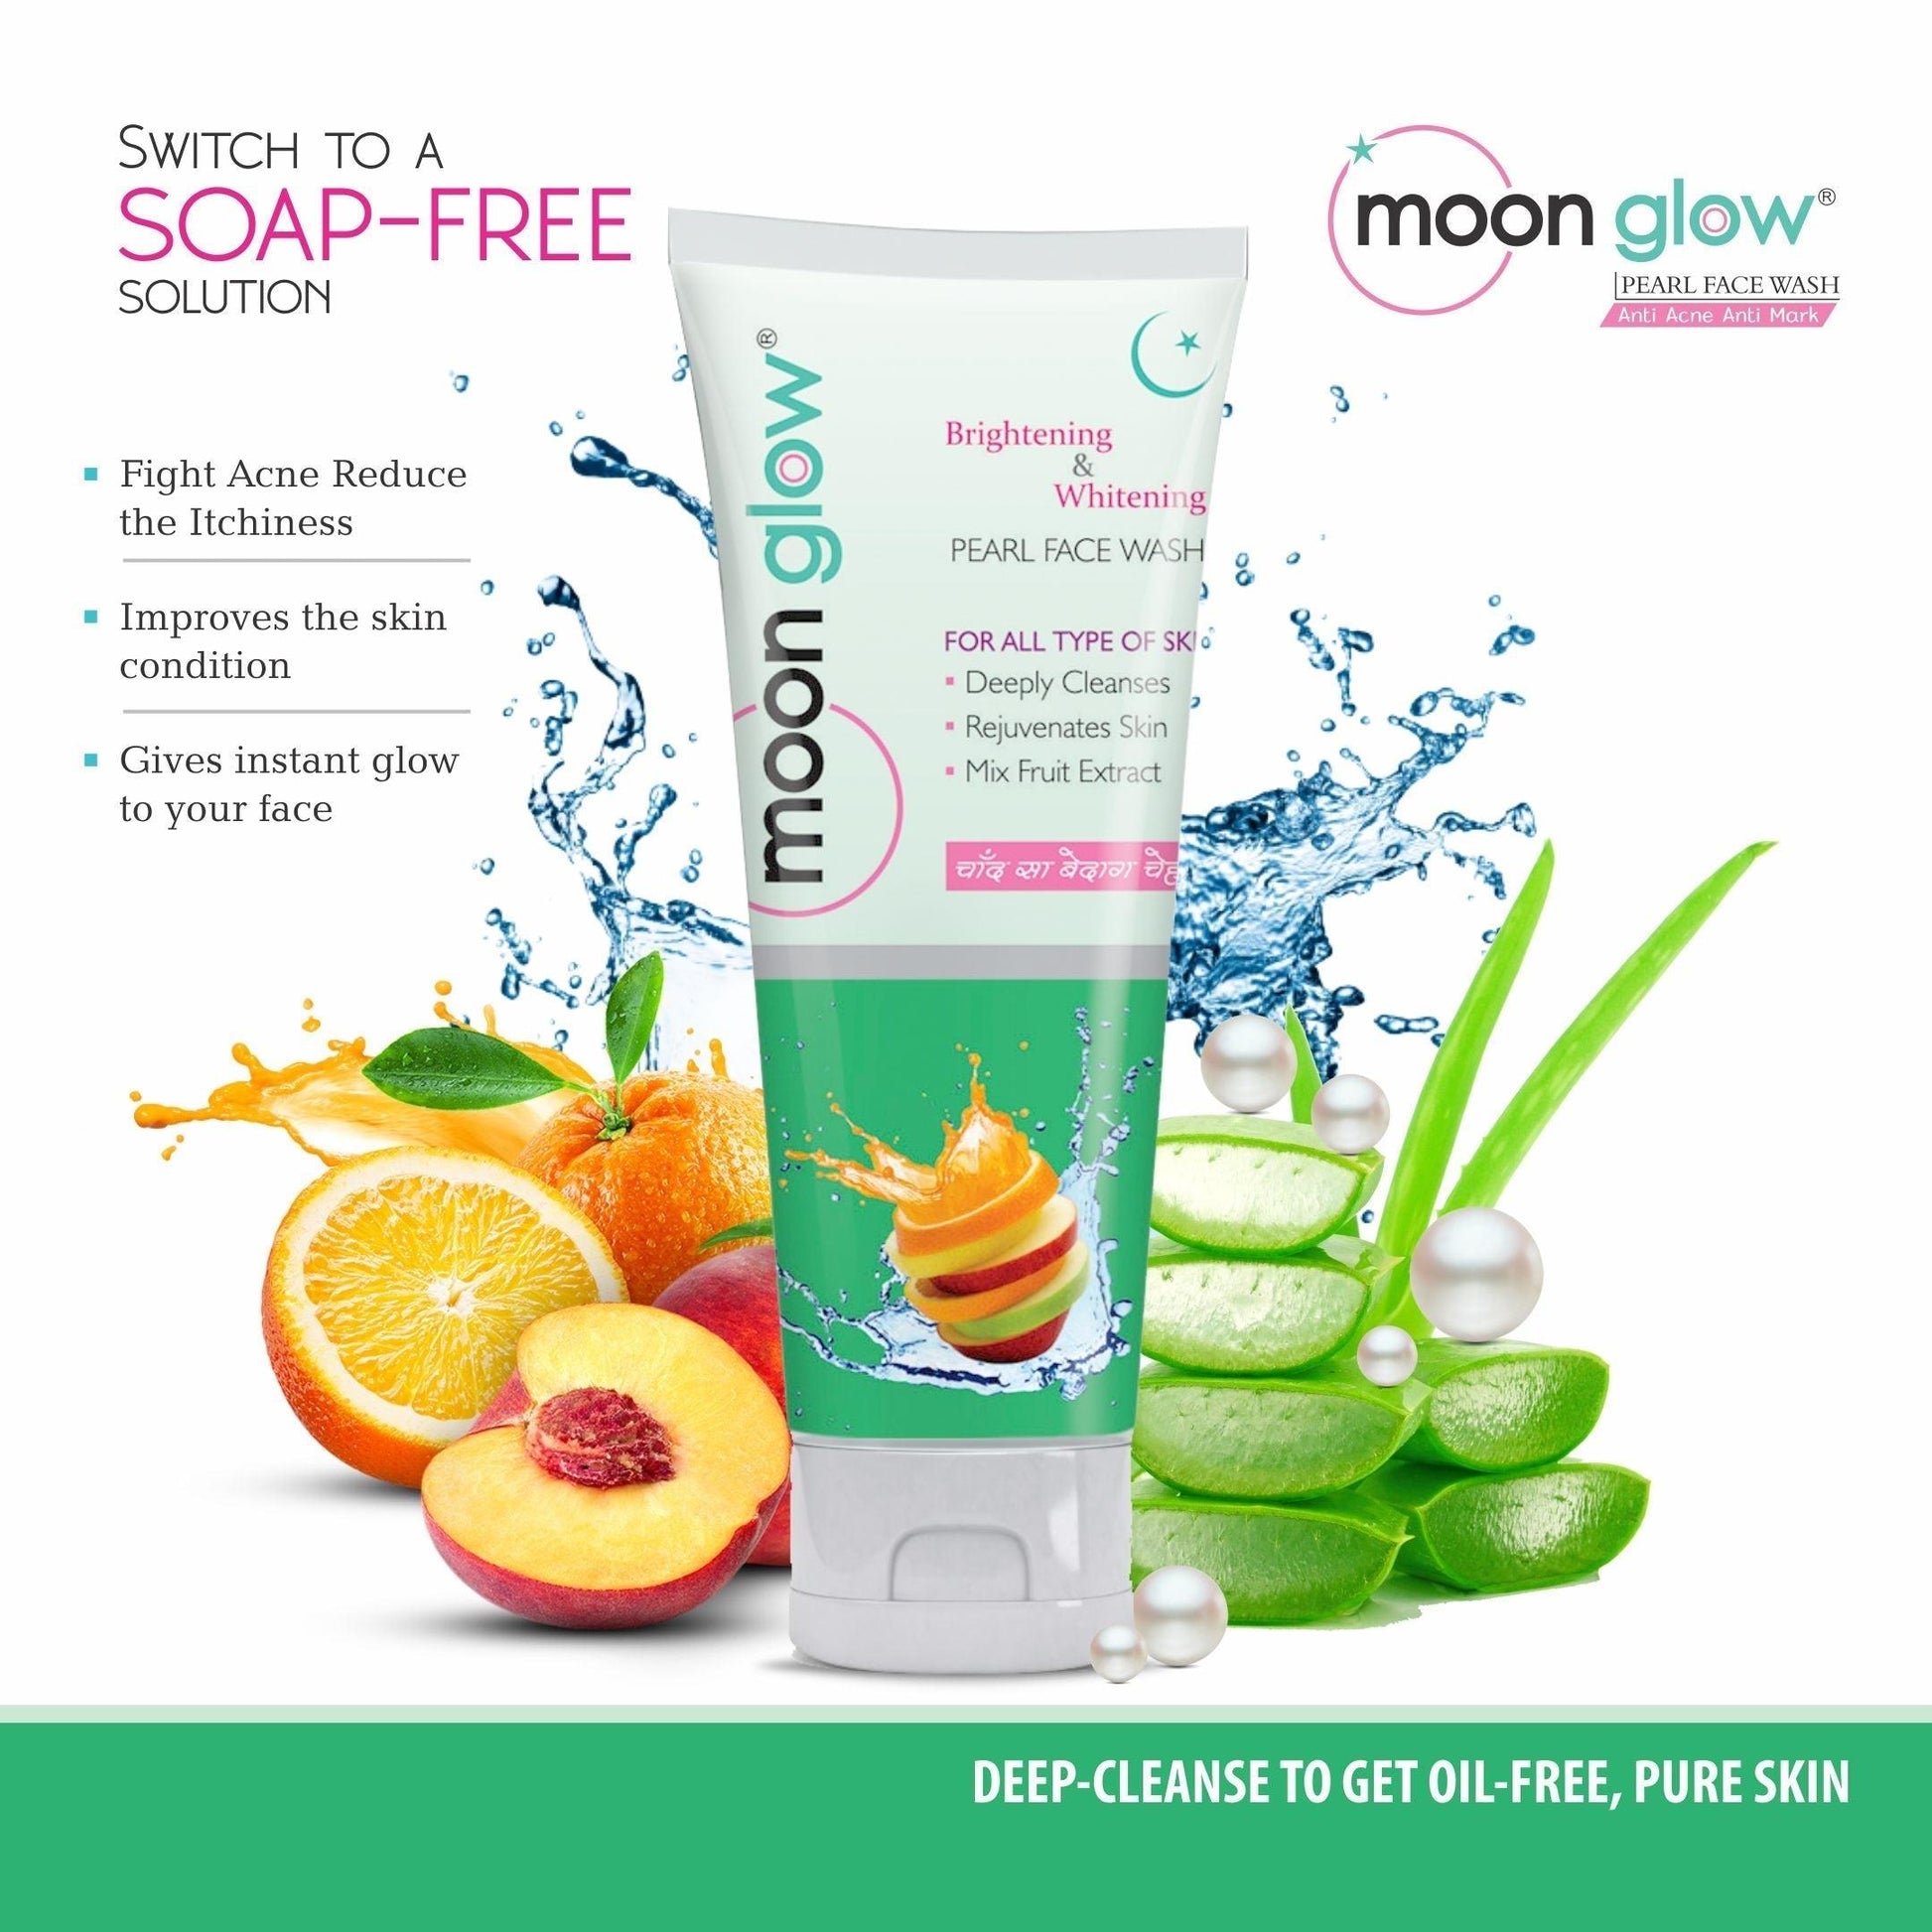 Moon Glow 2 Cream, 2 Pearl Face Wash and 2 Soap Combo Pack for Acne, Pimples, Black Spots, Dark Circles, Stretch Marks, Anti-Aging and Fairness (2 Cream + 2 Pearl Face Wash +2 Soap) - Olefia Biopharma Limited